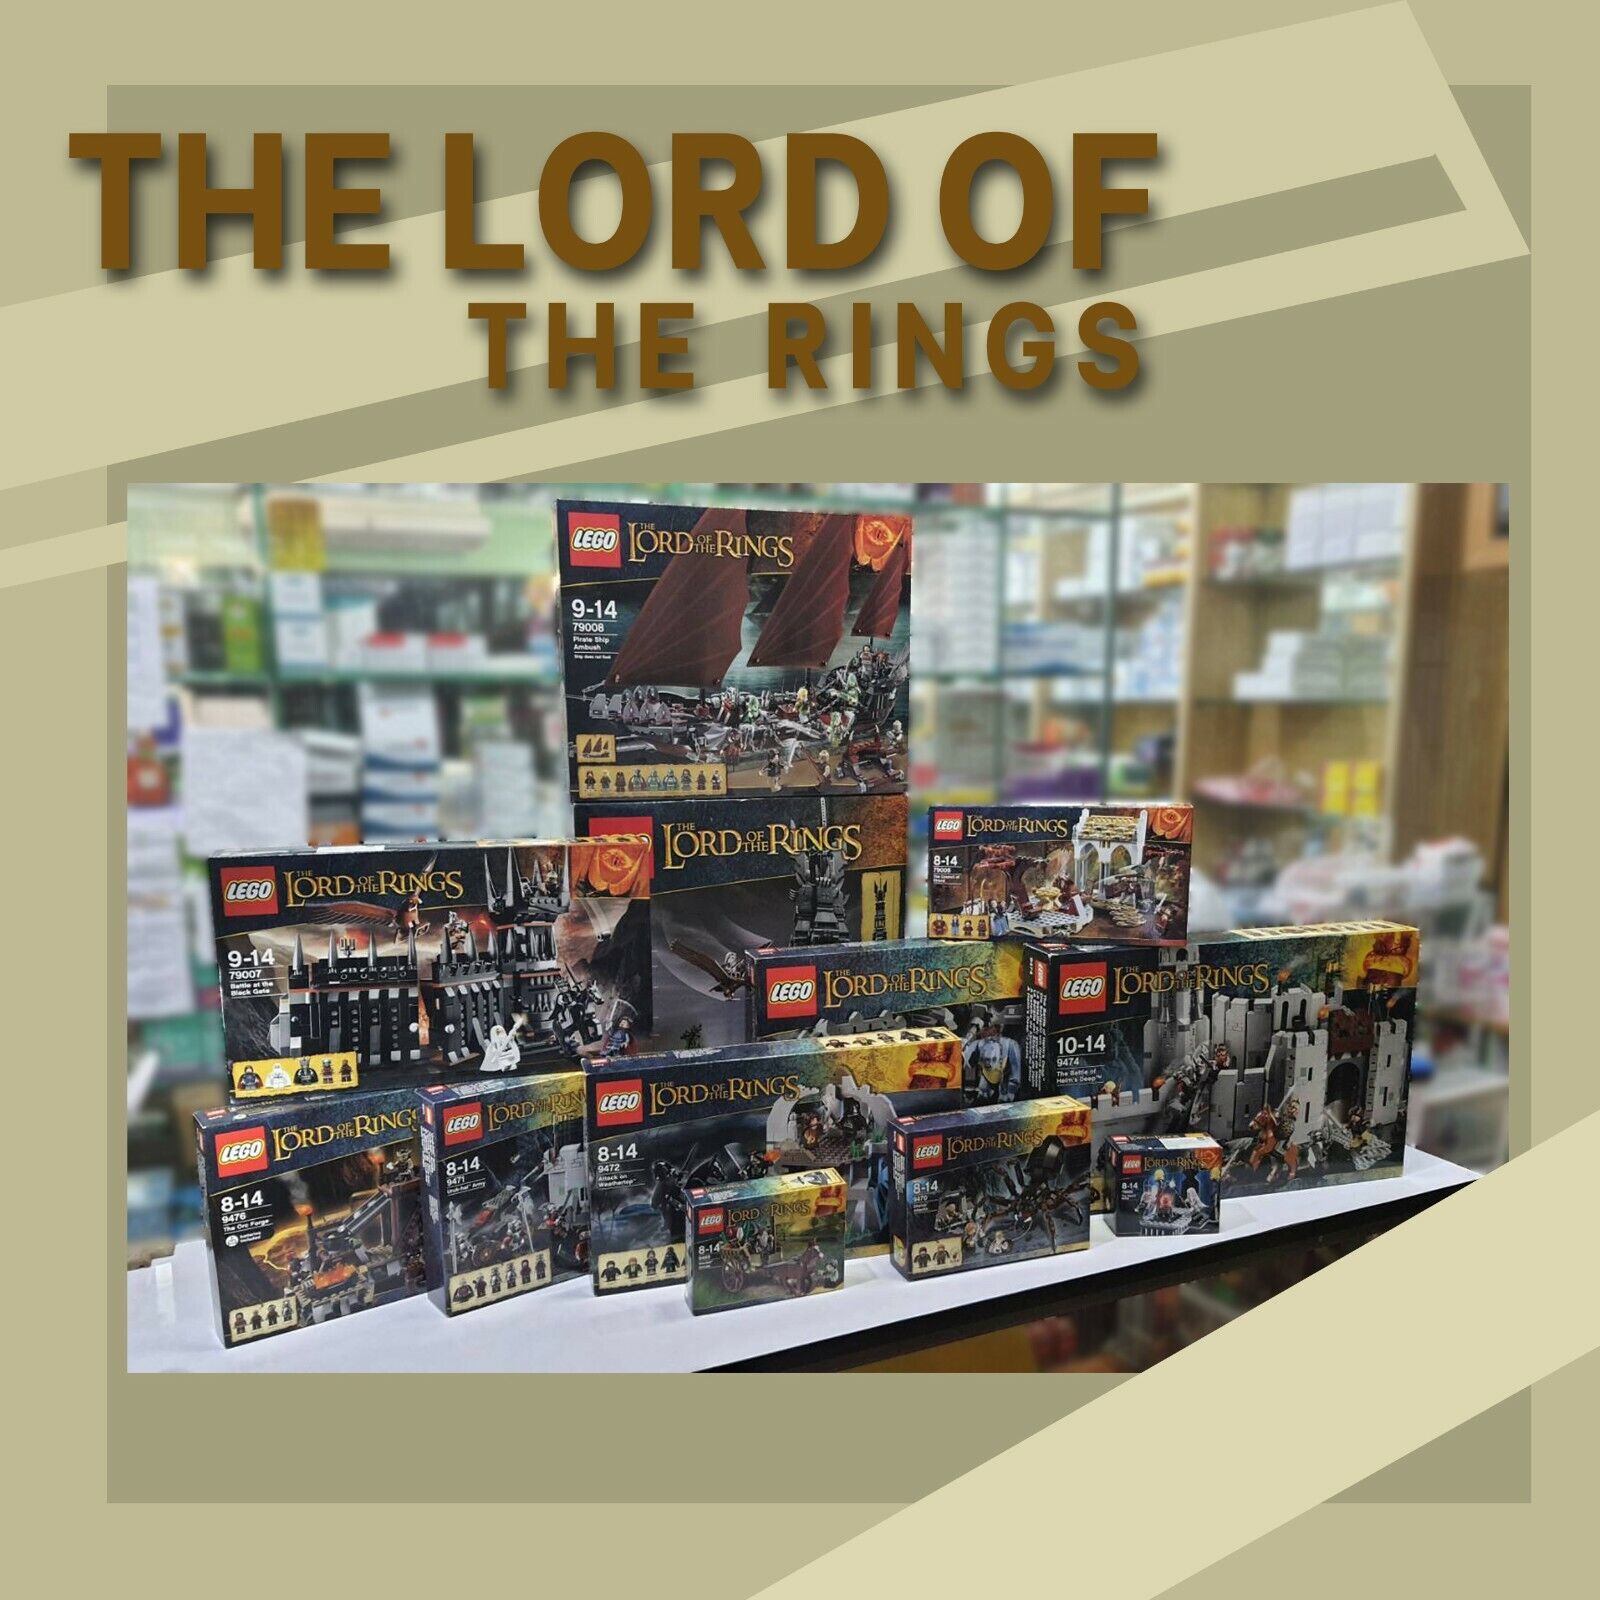 LEGO: The Lord of the Rings brand-new, unused, unopened item Complete Set 12 box LEGO